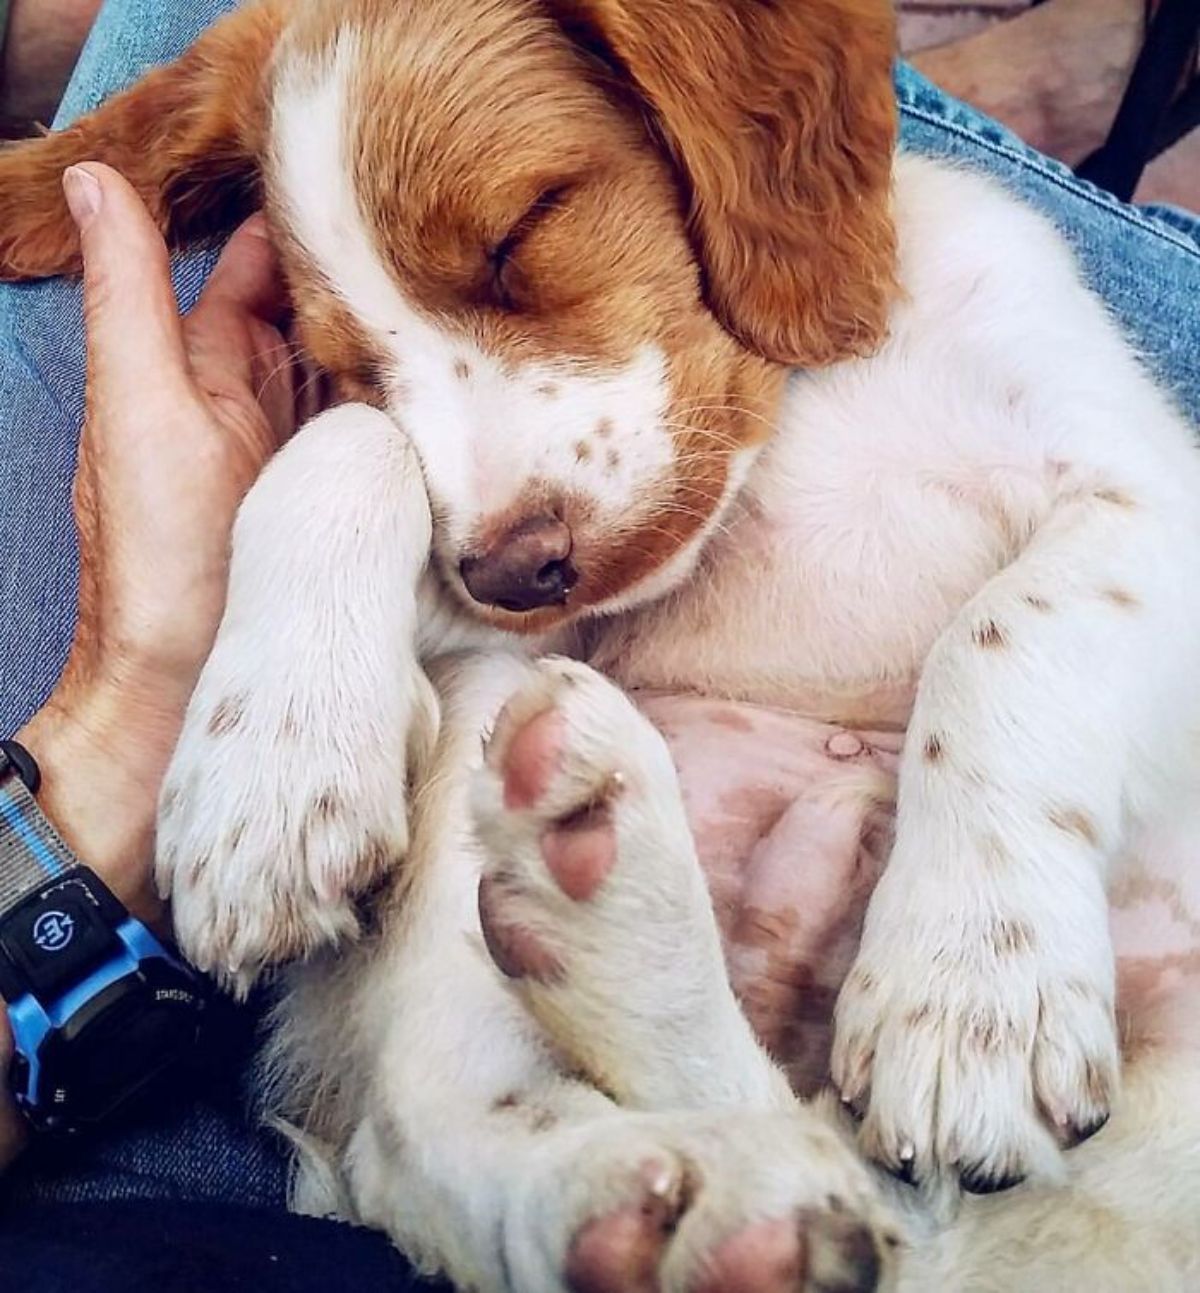 brown and white puppy being held by someone